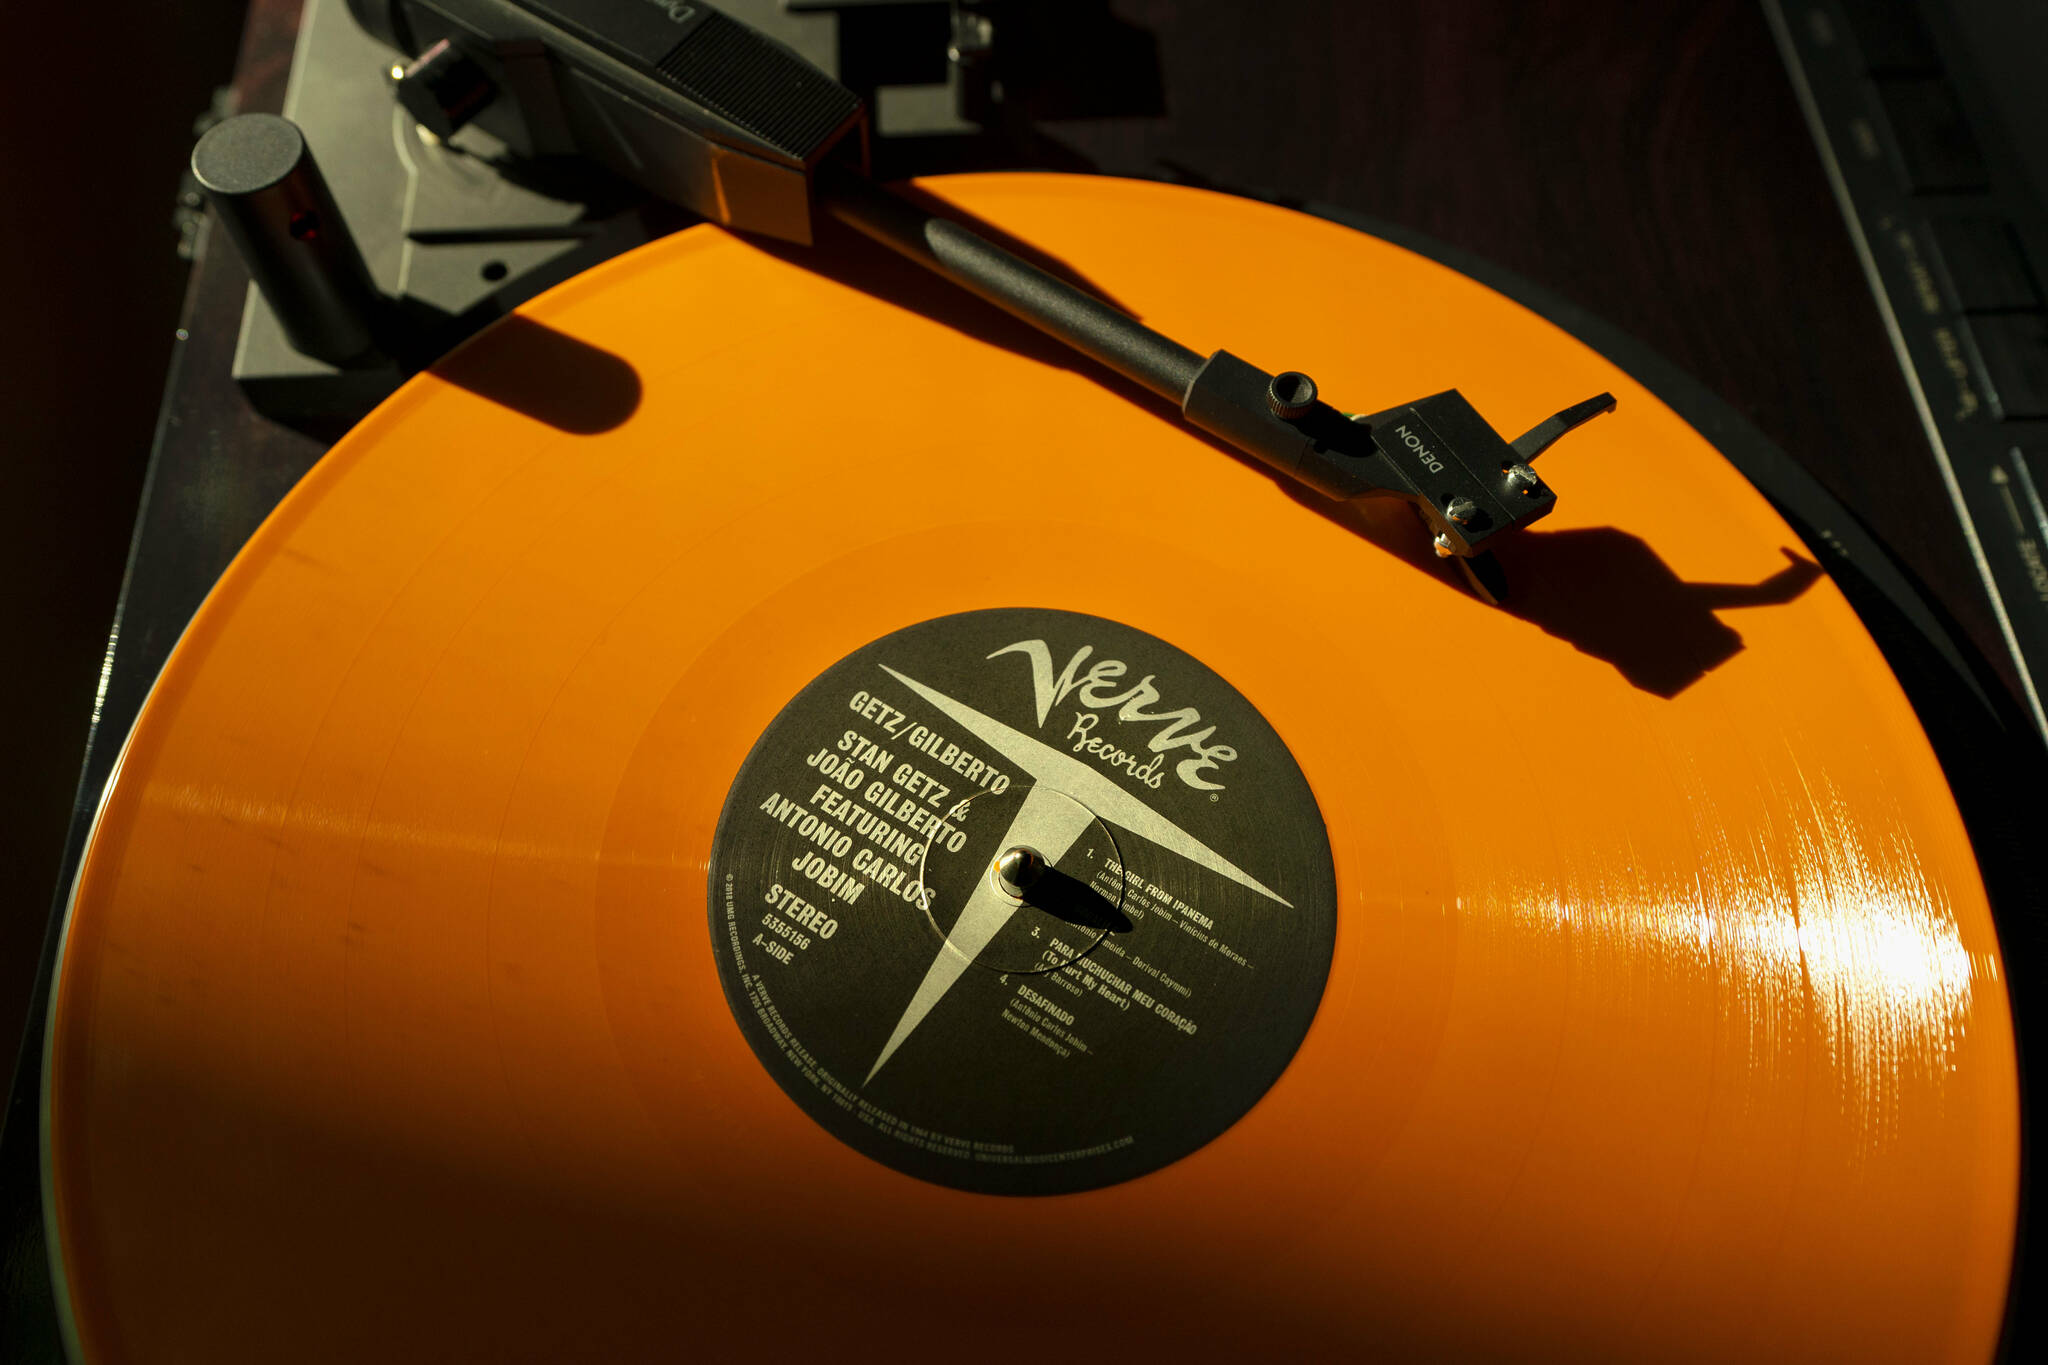 A vinyl record by The Verve plays on a turntable, Thursday, May 27, 2021, in Falmouth, Maine. The COVID-19 pandemic benefitted record store owners who saw a surge in sales. (AP Photo/Robert F. Bukaty)